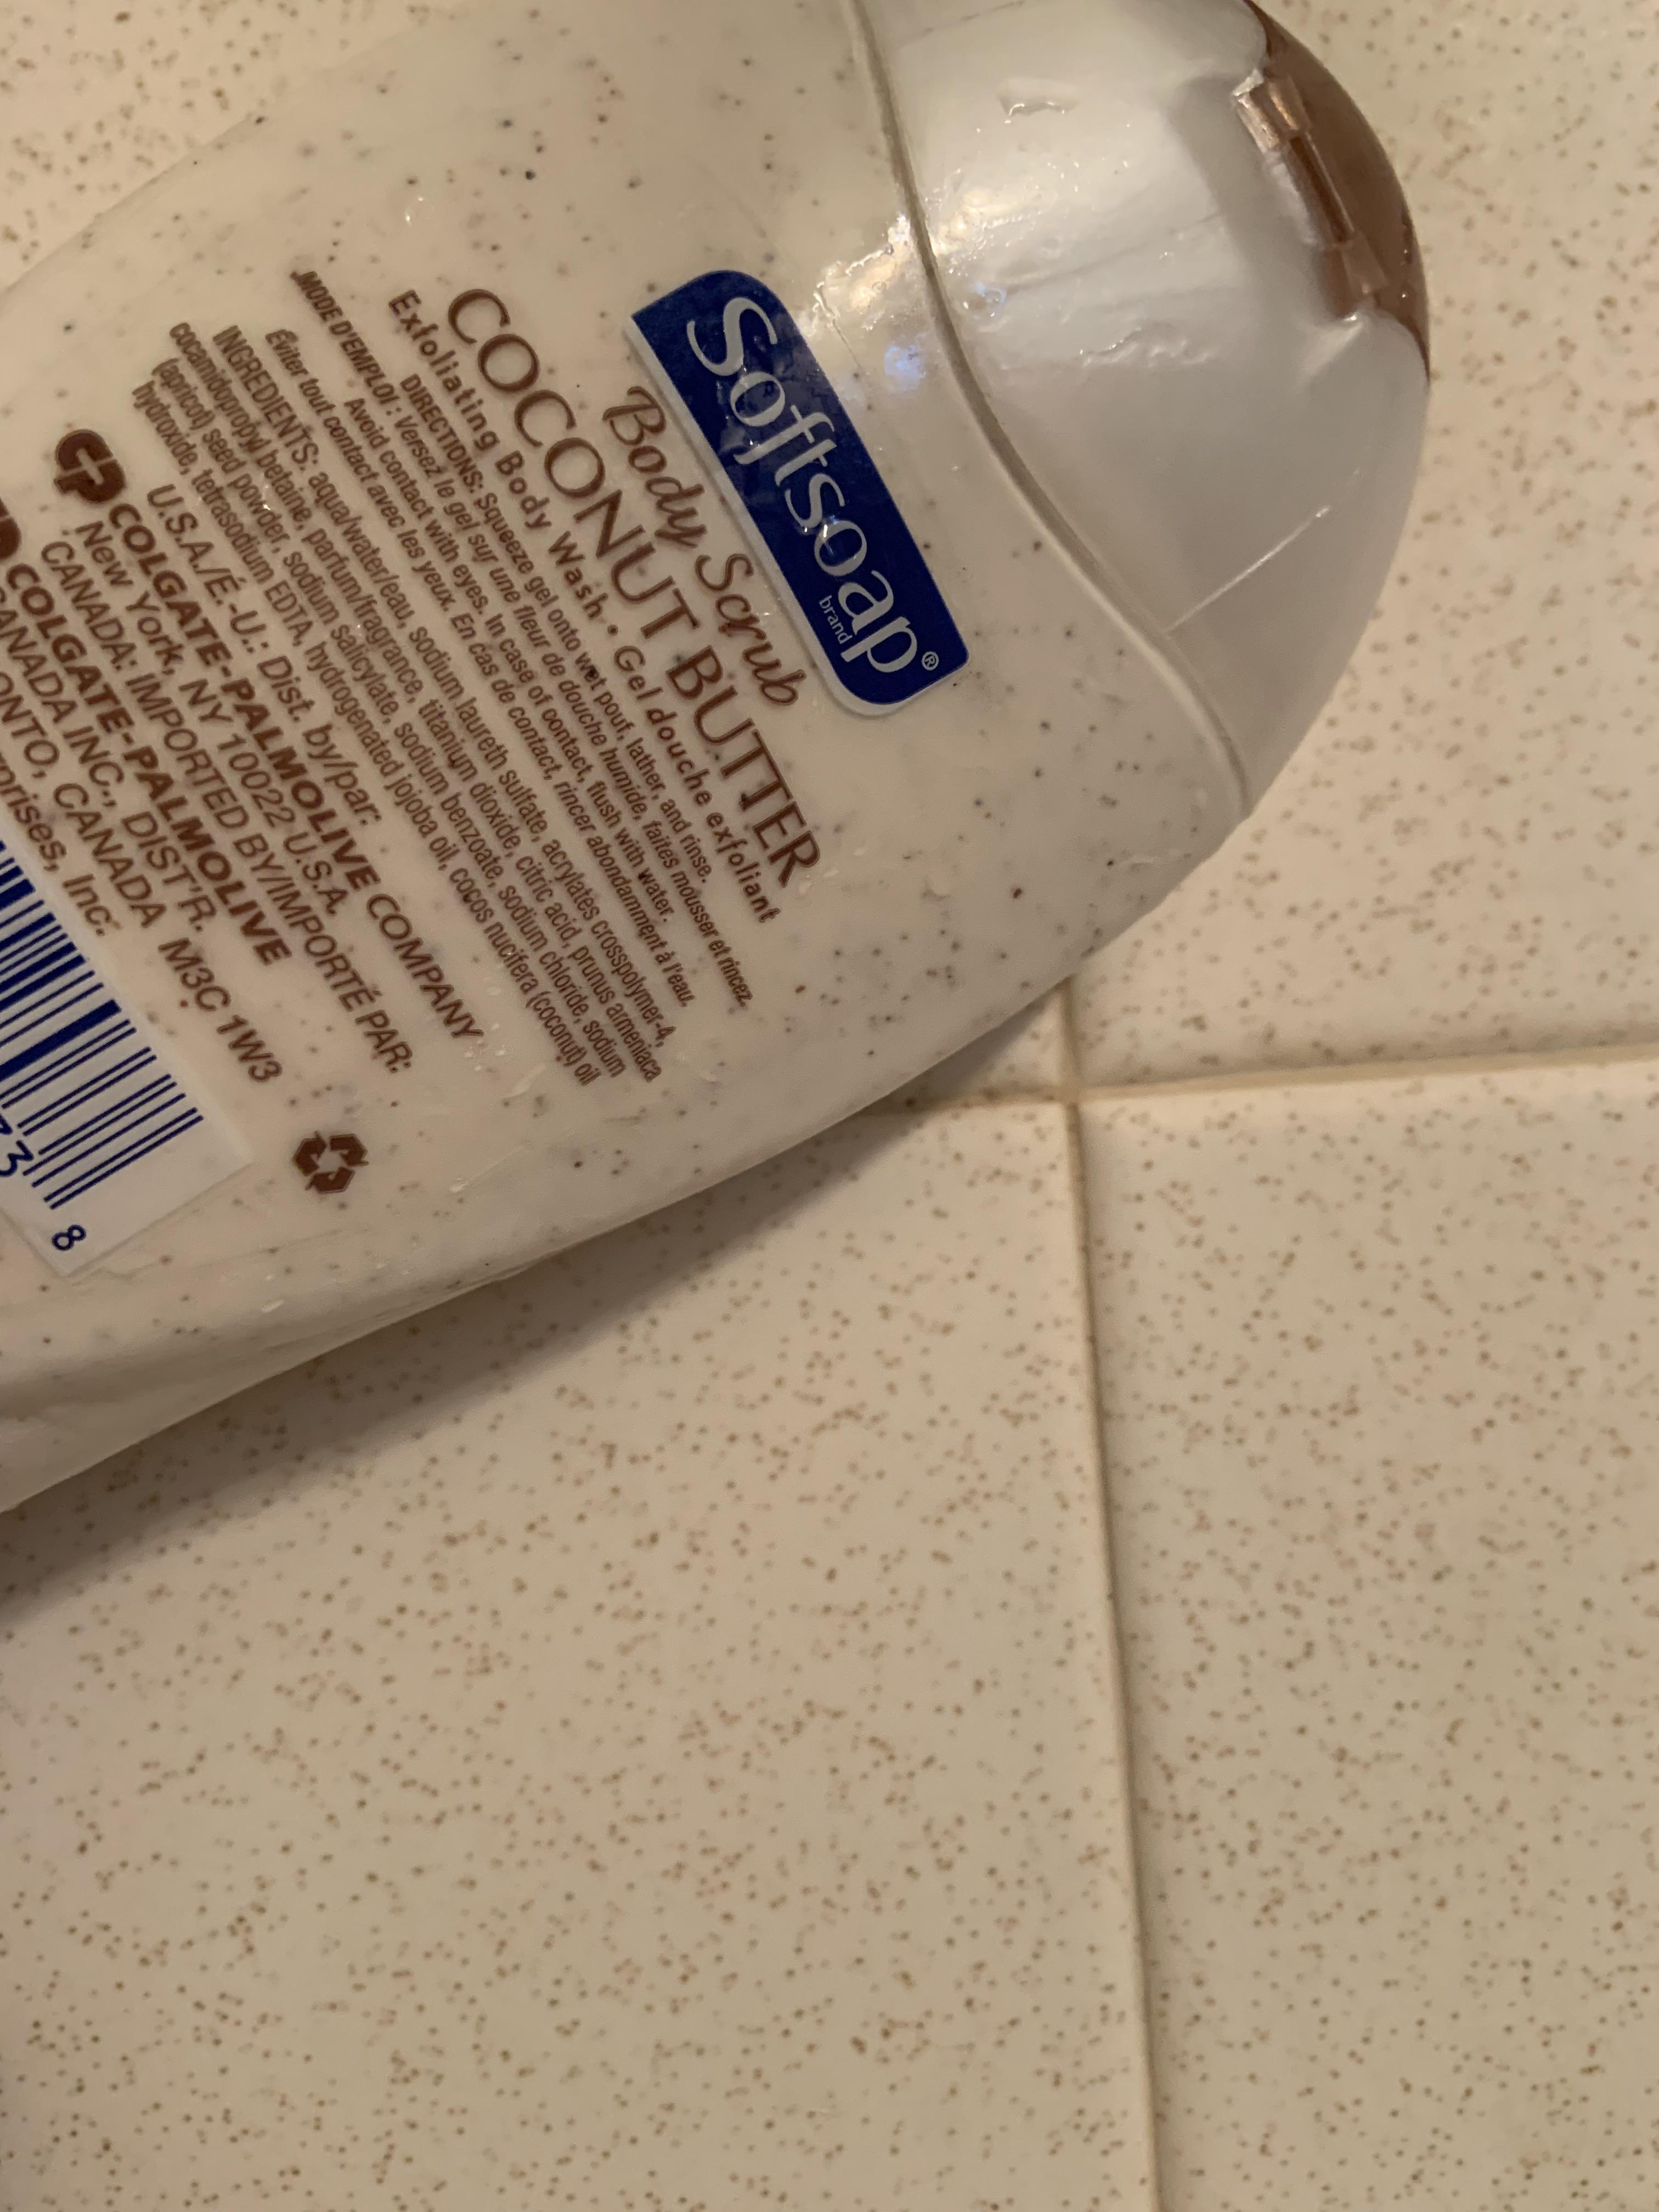 My body wash perfectly matches the tile in my shower